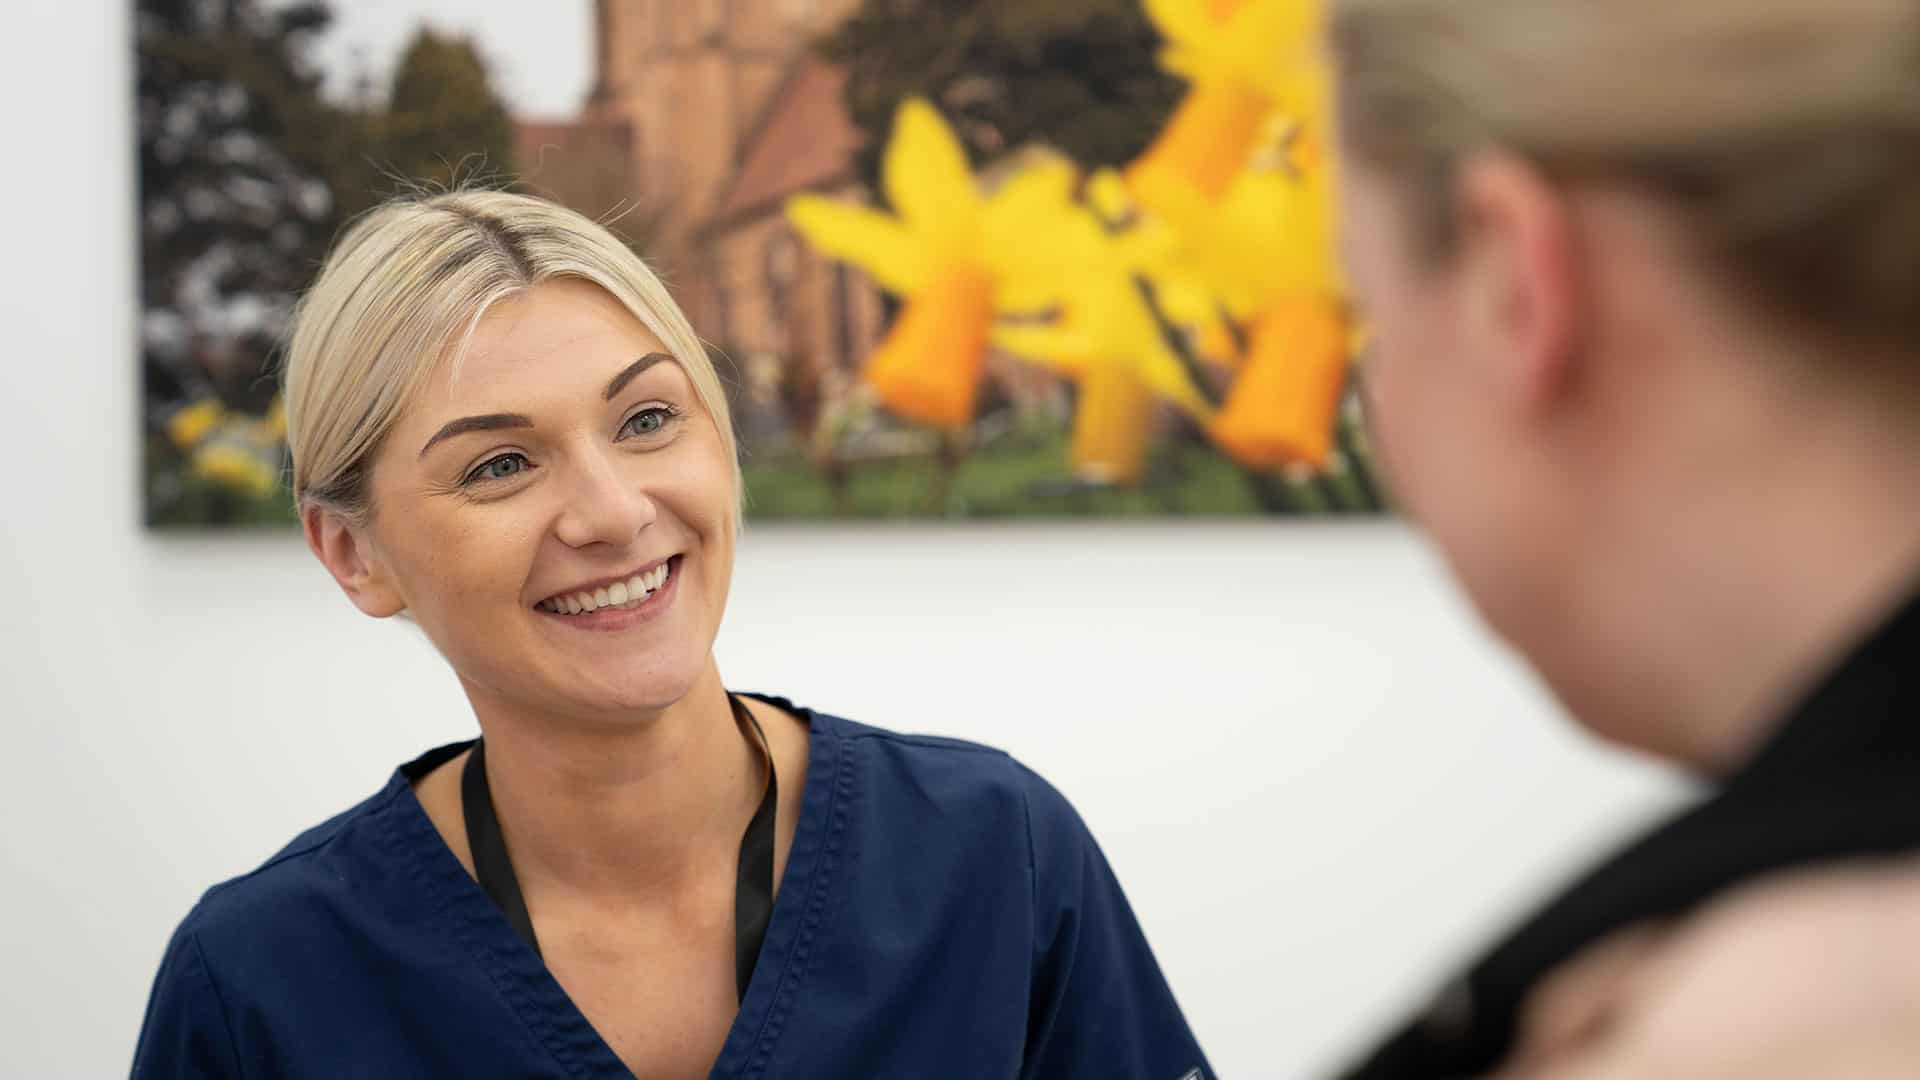 patient and nurse talk about upcoming smile in a day treatment